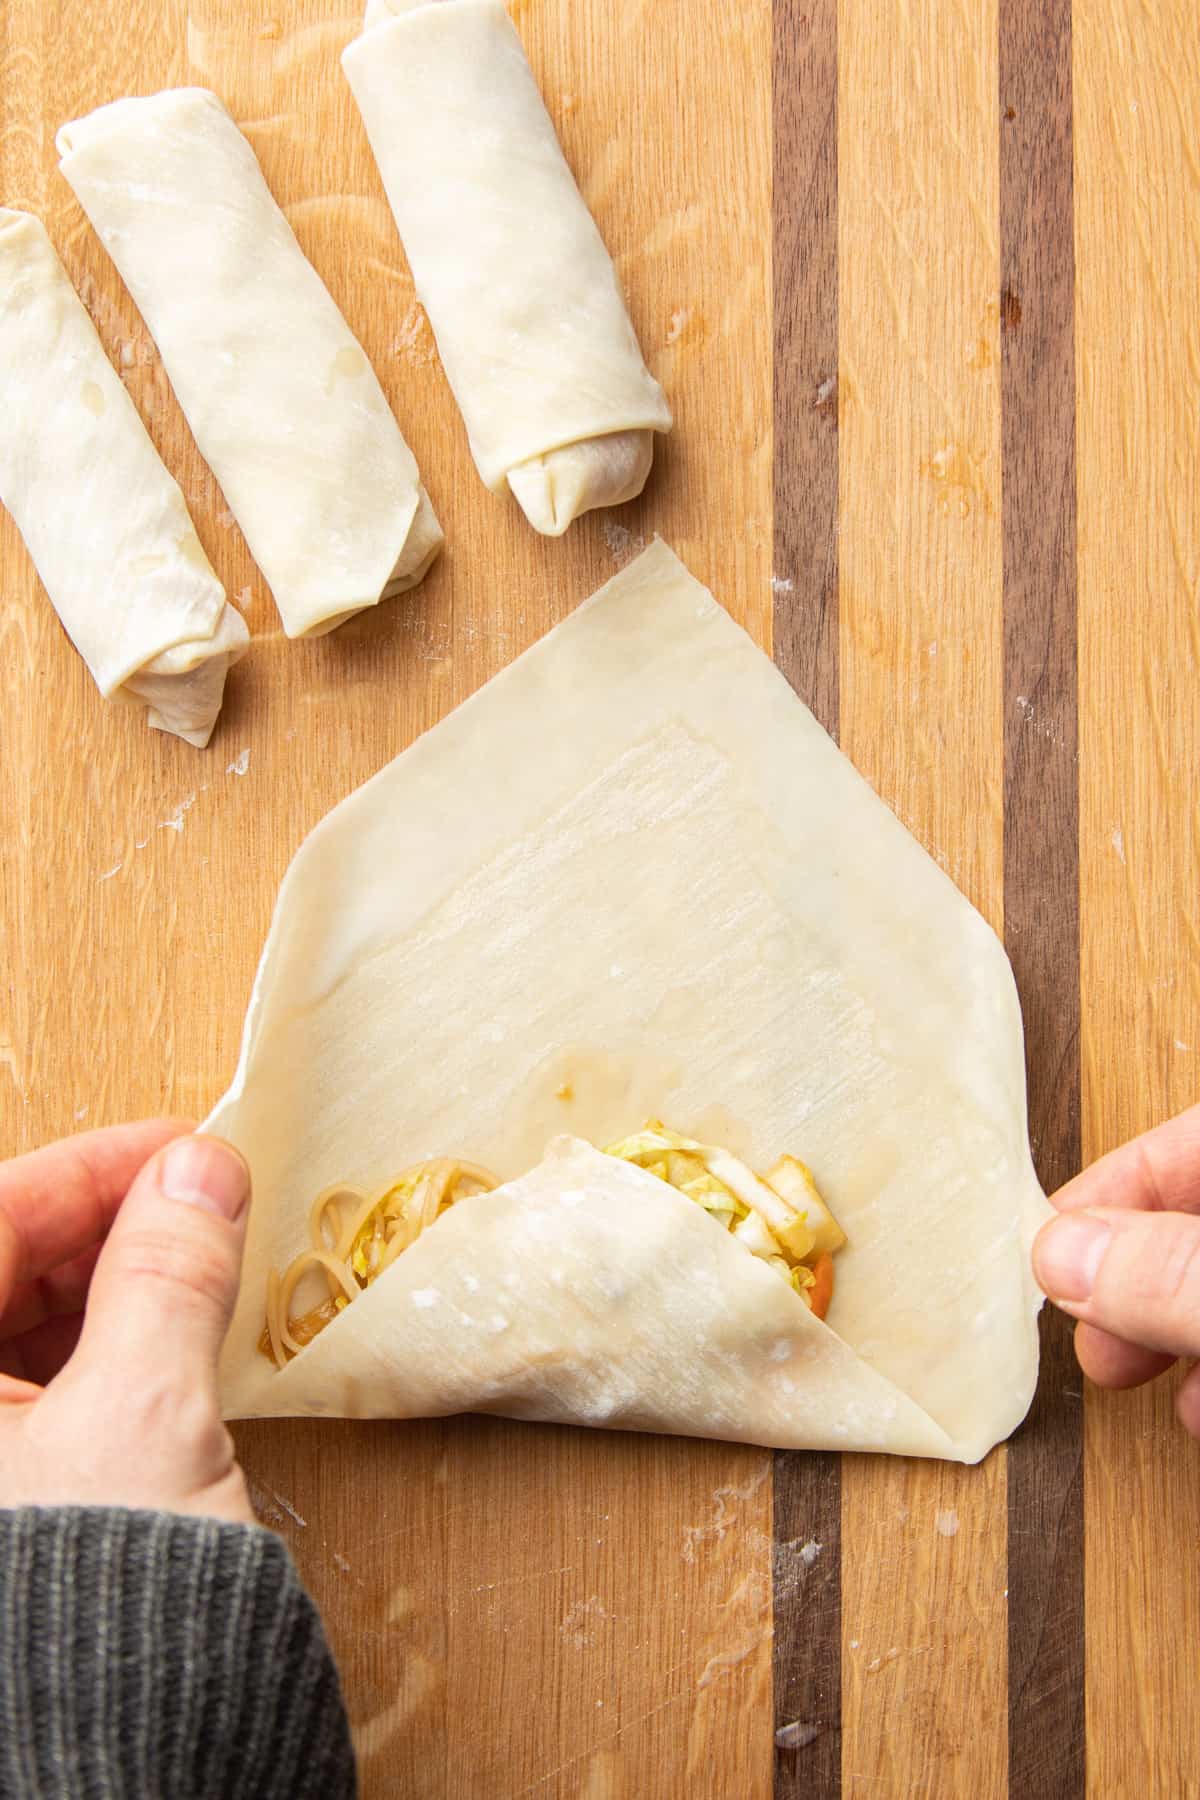 Pair of hands rolling a spring roll.